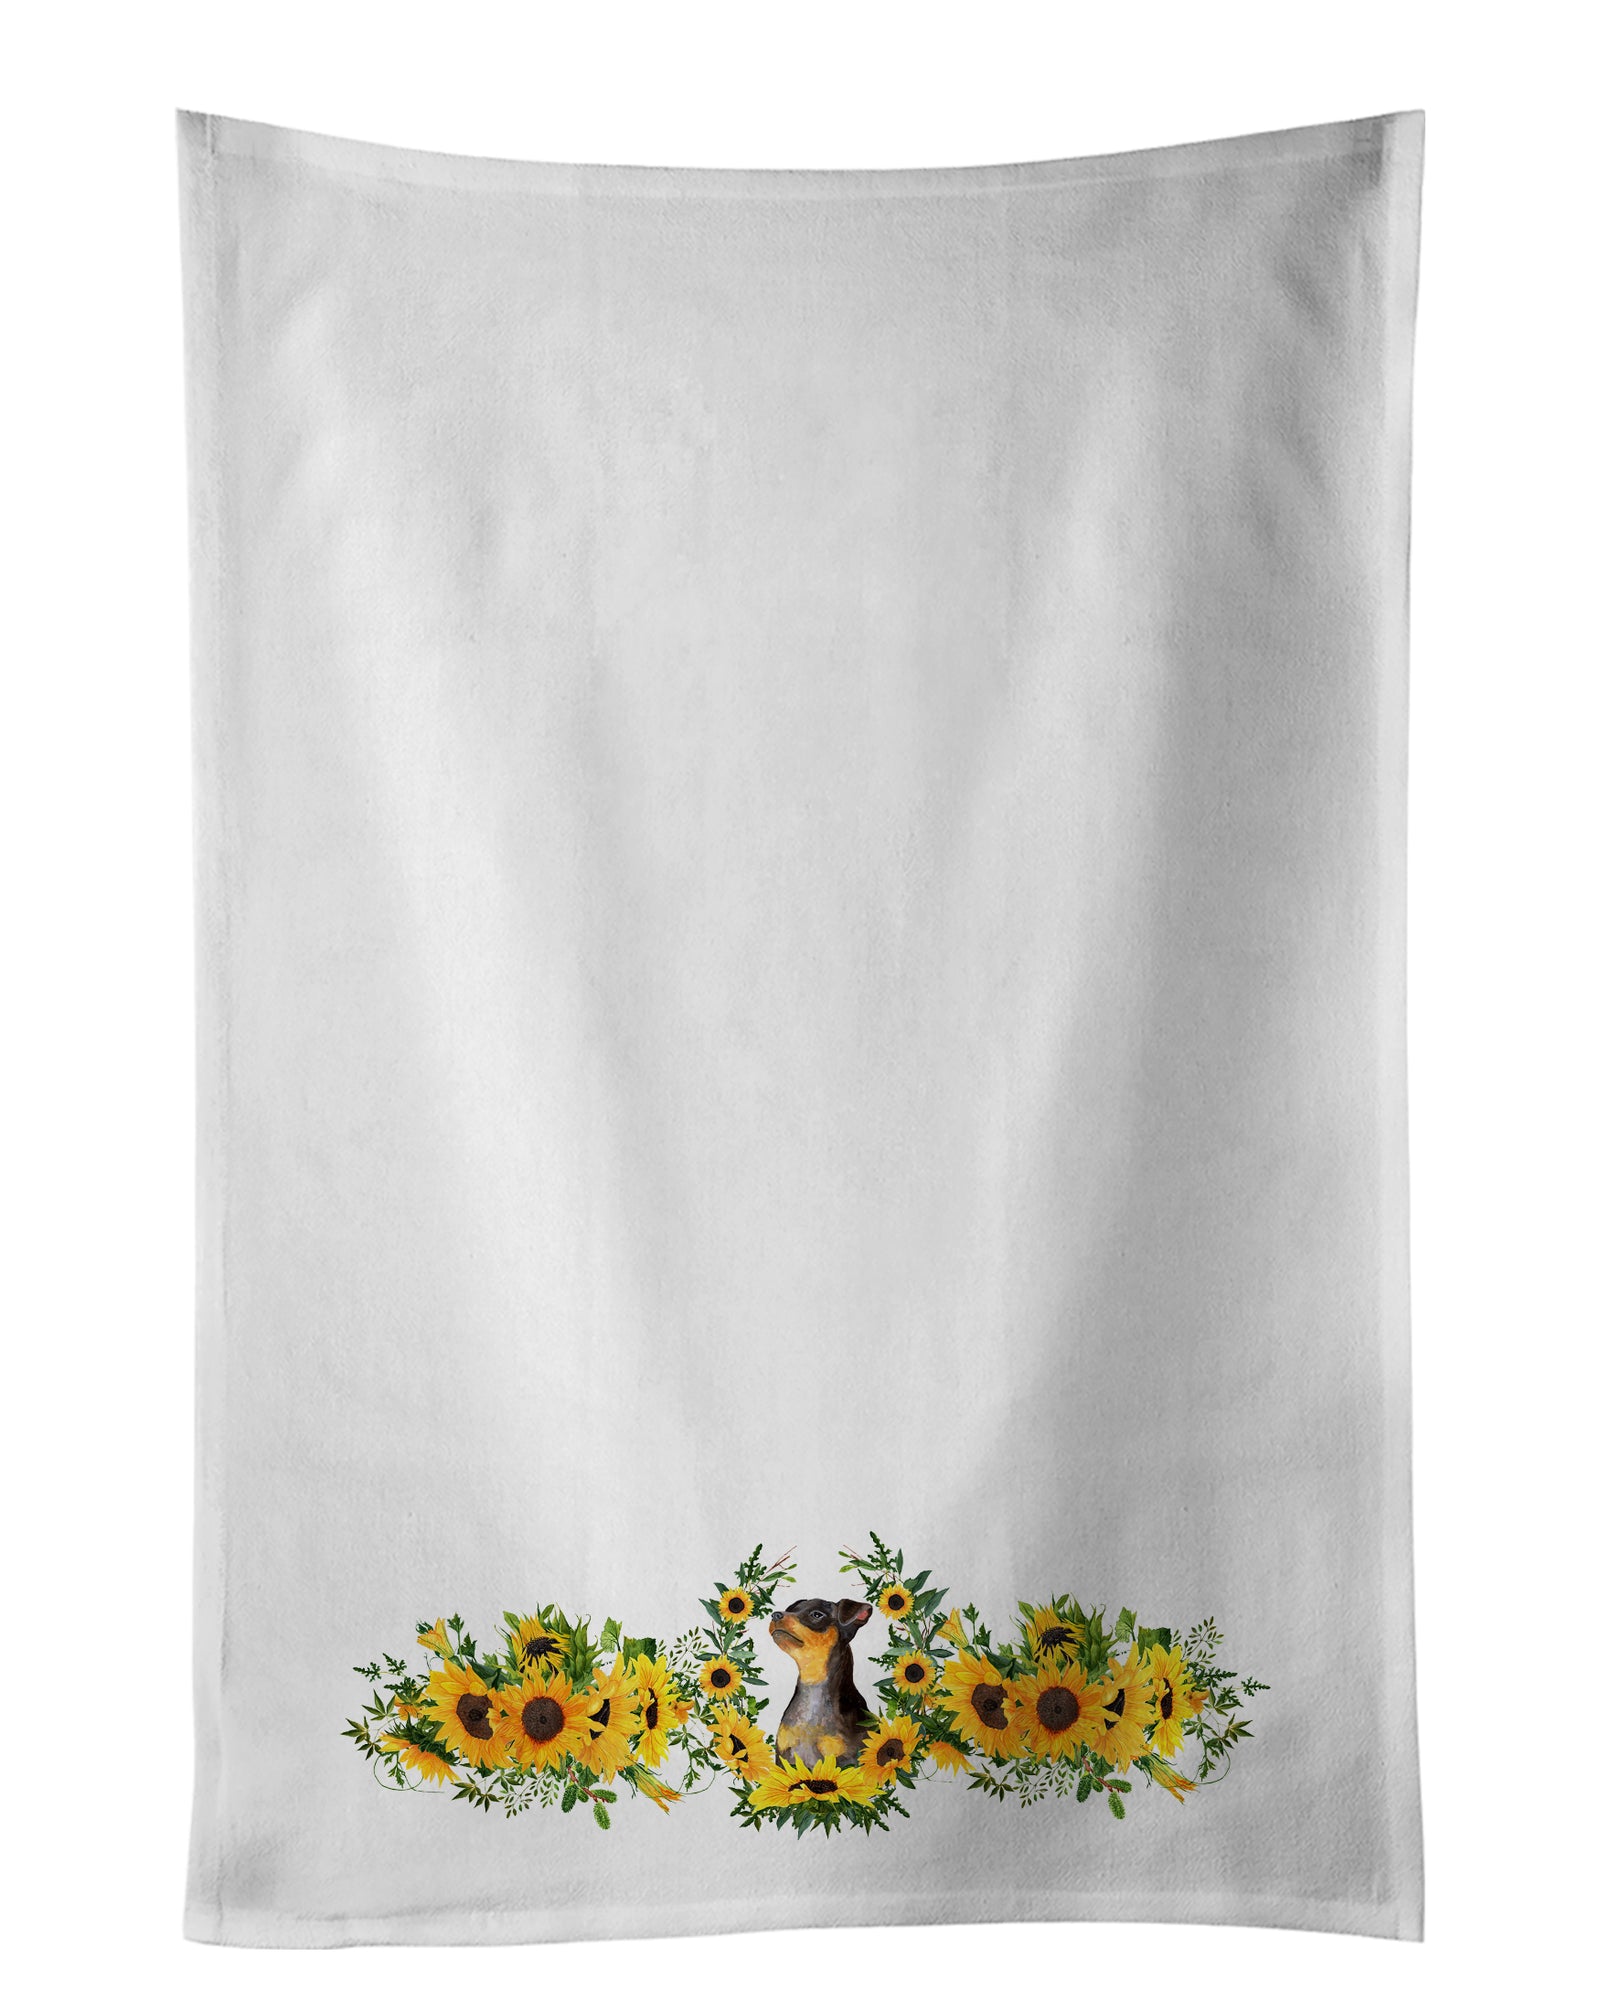 Buy this Miniature Pinscher #2 in Sunflowers White Kitchen Towel Set of 2